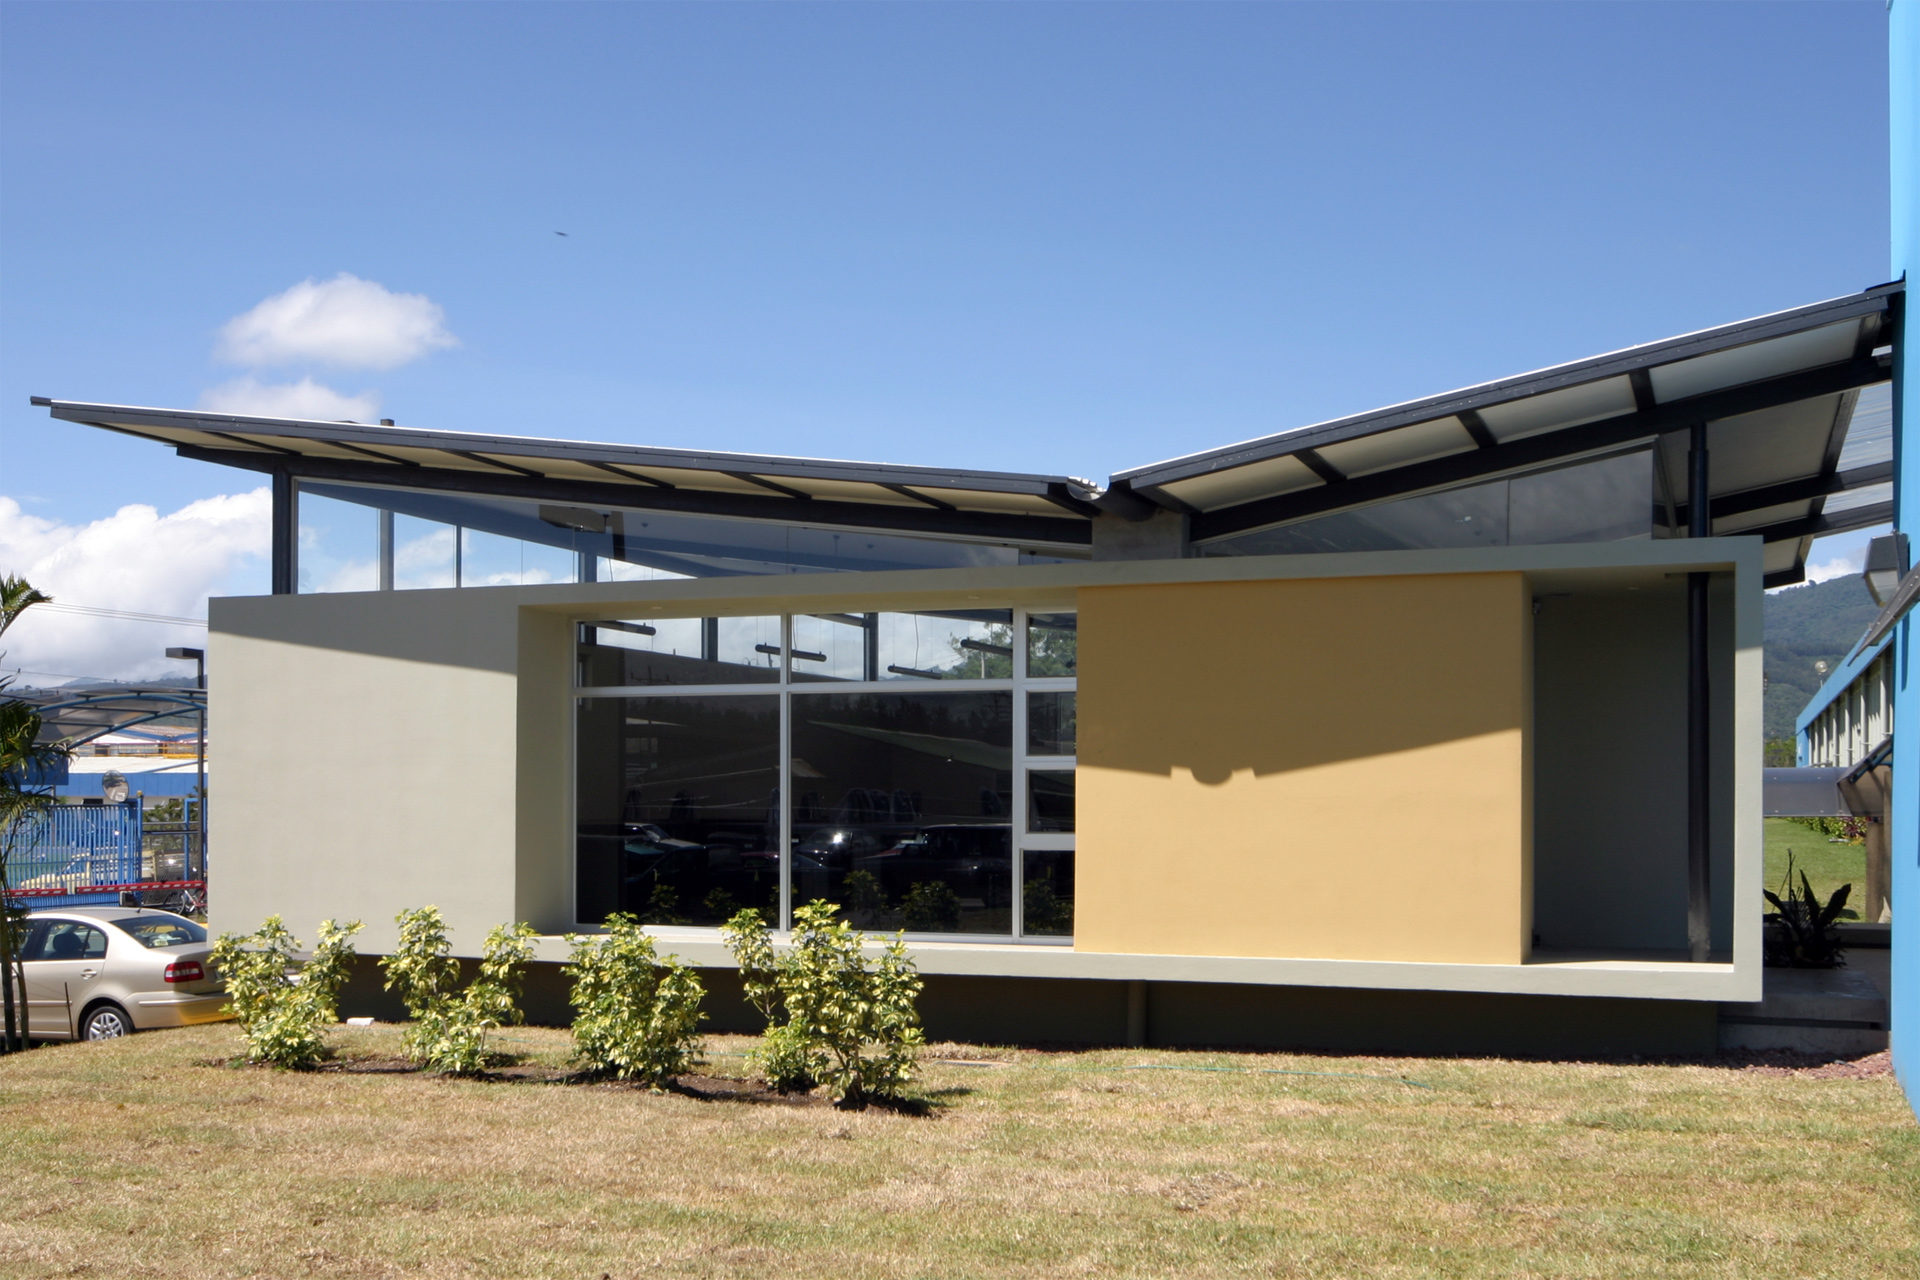 Frontal view of the Novartis Software Development Office, highlighting the unique inverted-pitched roofs with a round scupper drain. Quality Costa Rican Contemporary Design